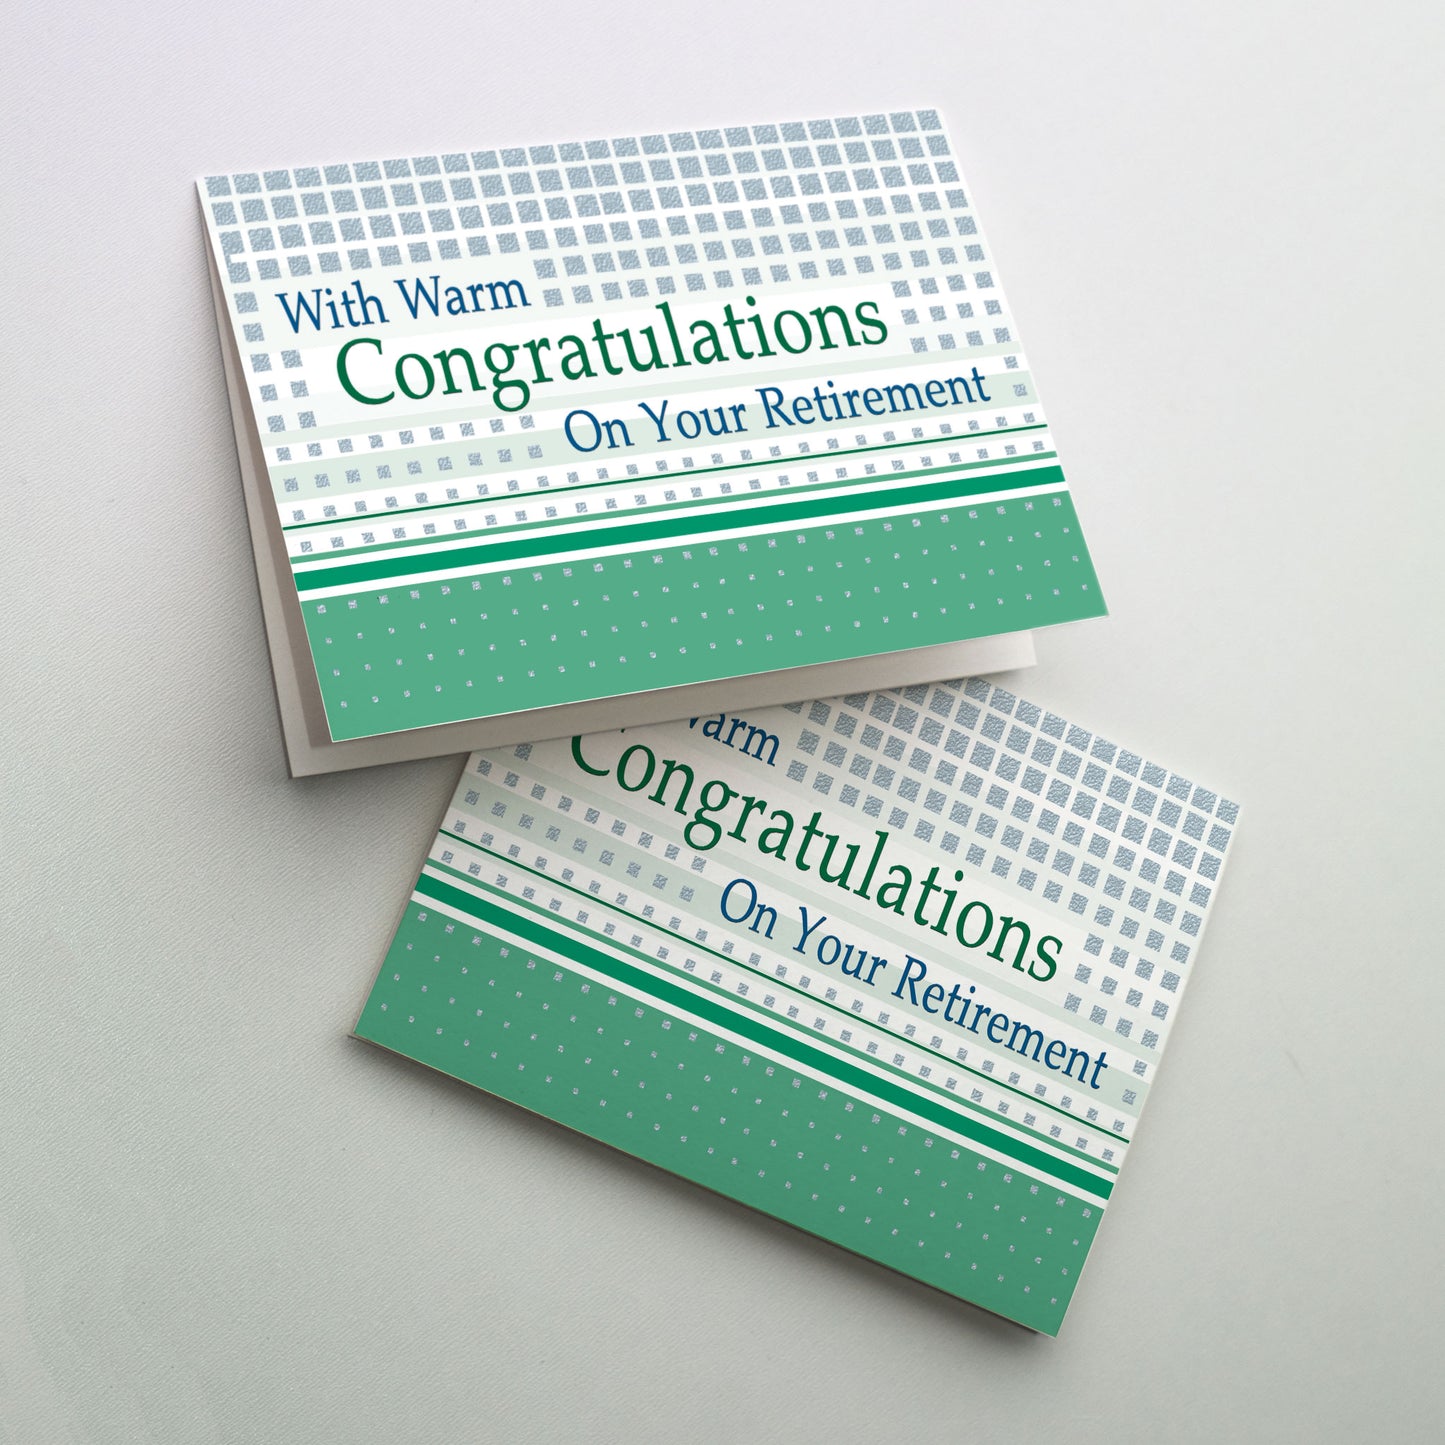 With Warm Congratulations on Your Retirement - Retirement Card